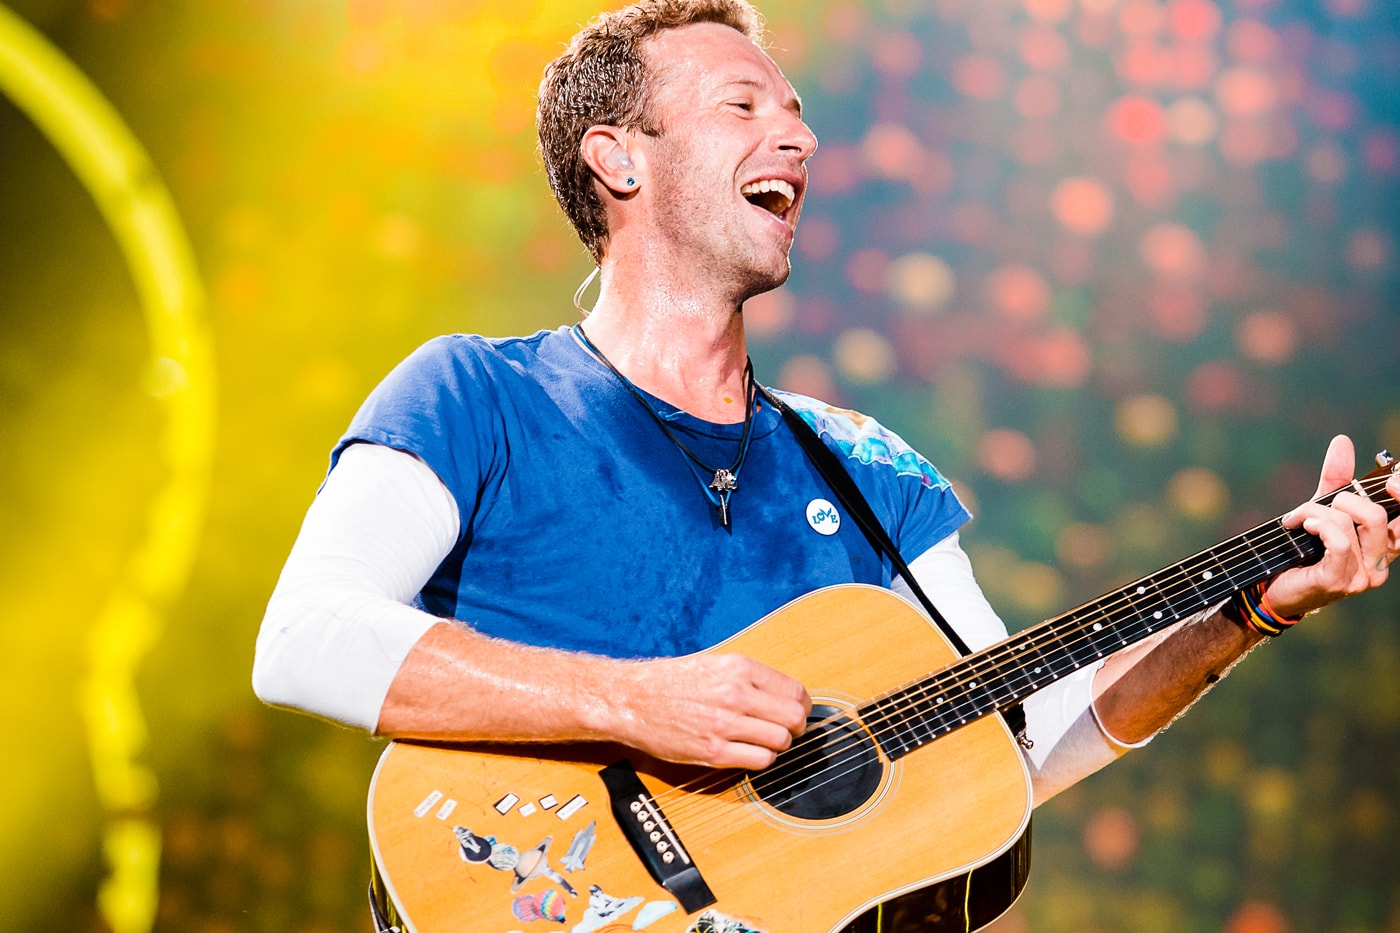 watch-coldplays-stunning-live-performance-music-video-for-amsterdam